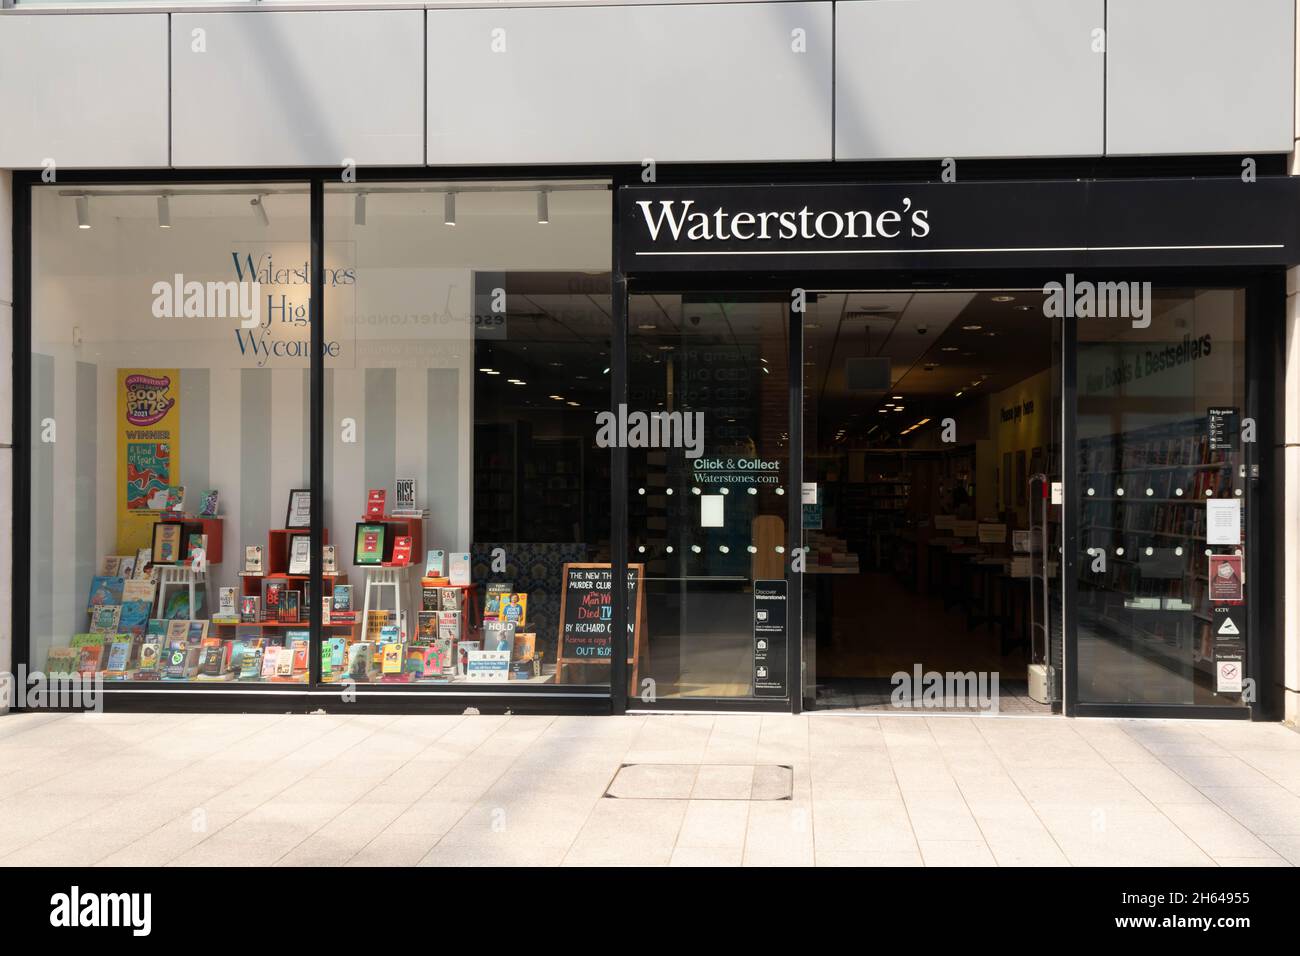 High Wycombe, England - July 21st 2021: Waterstone's shop in the Eden shopping centre. The chain operates around 283 stores. Stock Photo